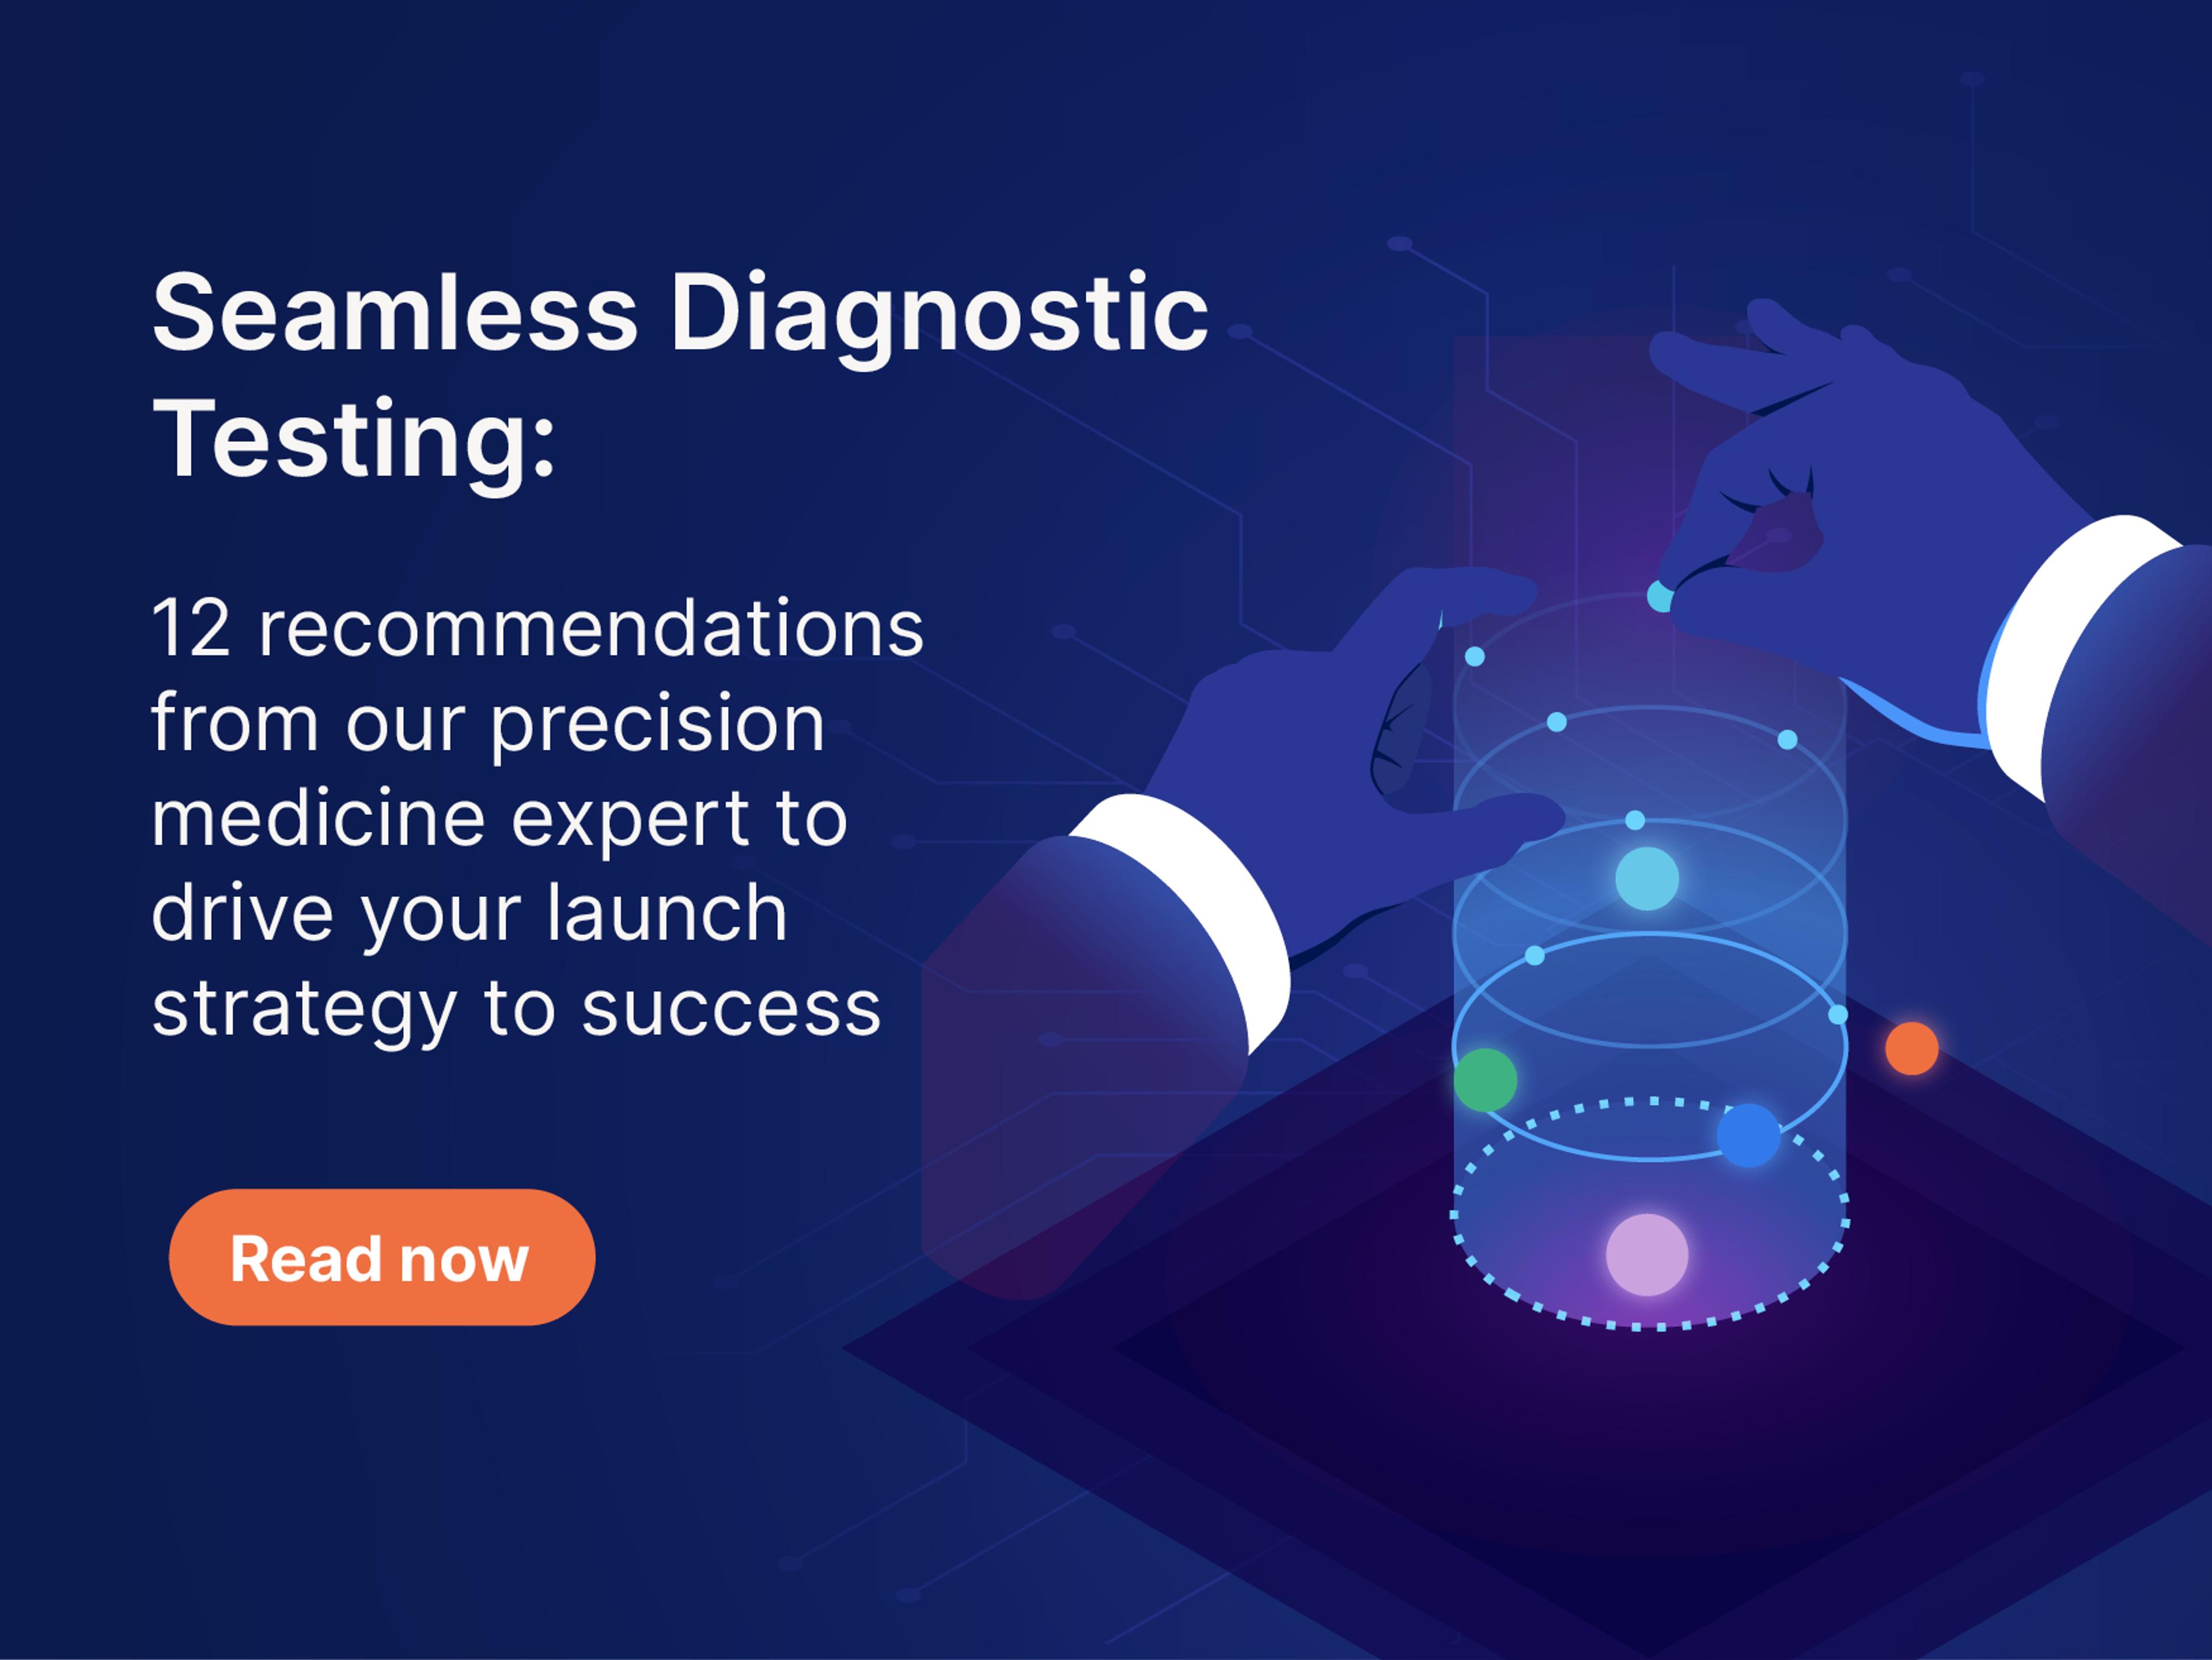 Seamless Diagnostic Testing: 12 recommendations from our precision medicine expert to drive your launch strategy to success